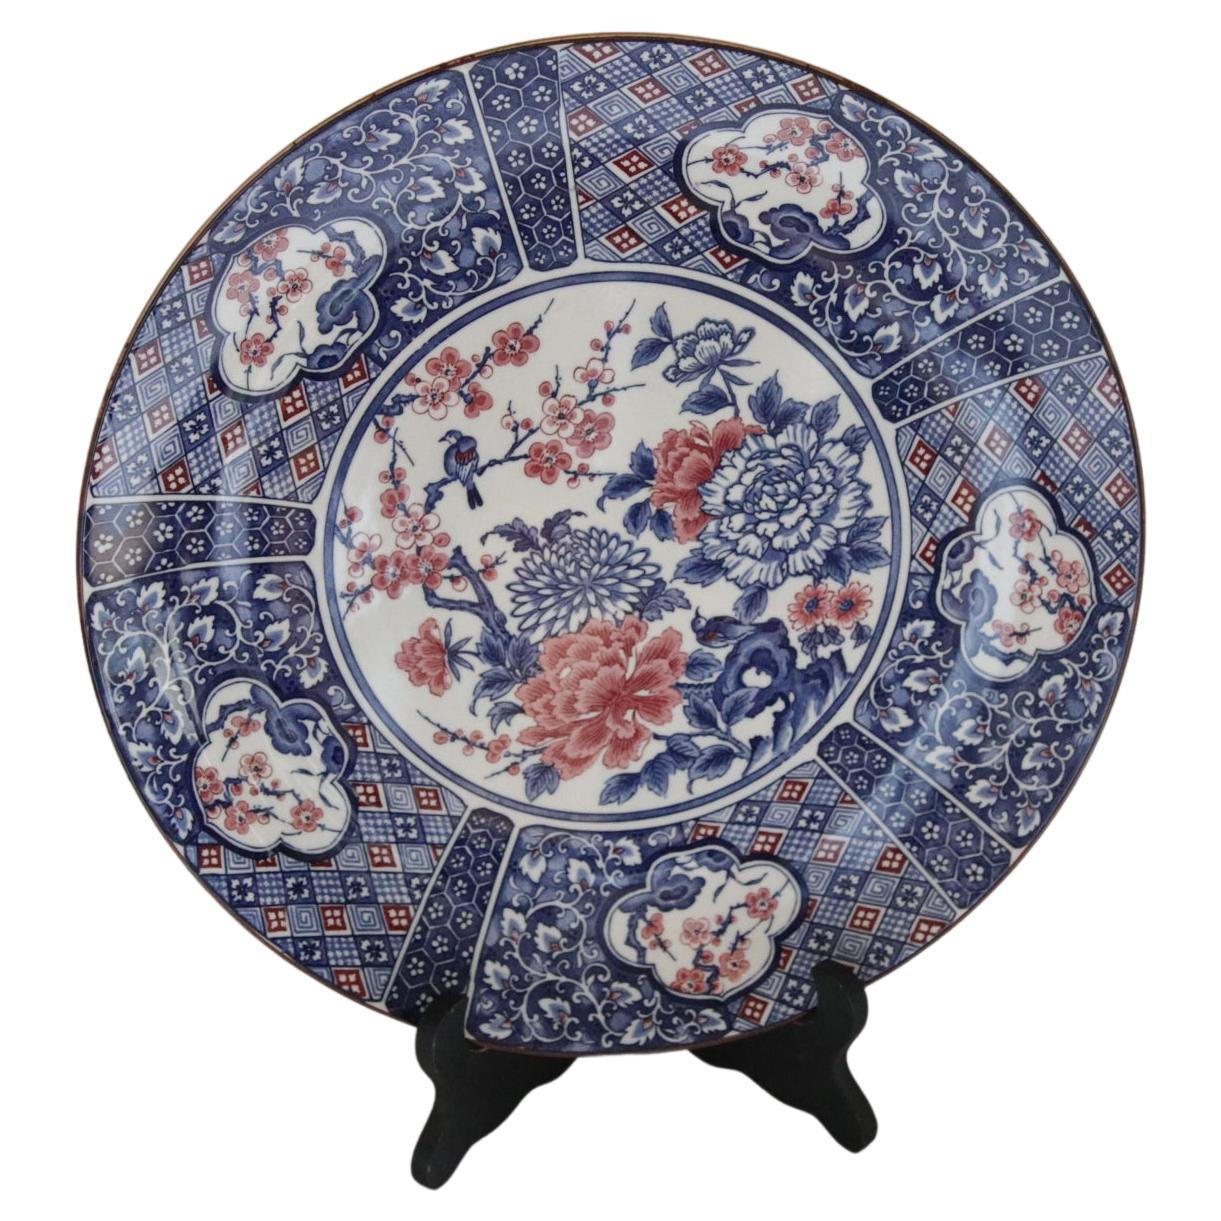 Japanese Arita Ware Blue and White Charger with Pink and White Chrysanthemums